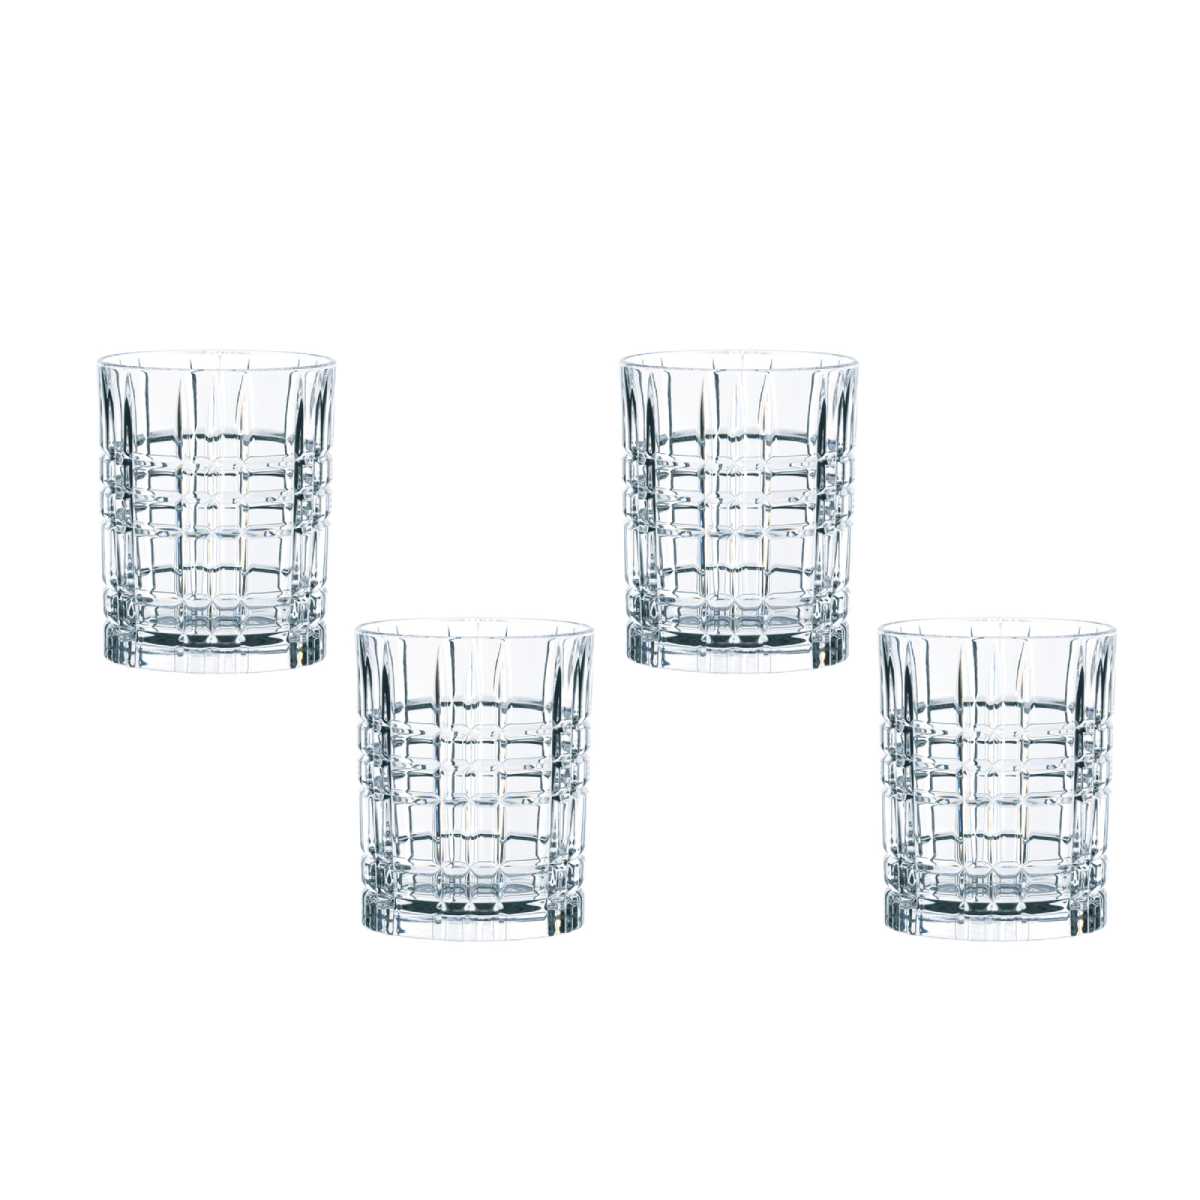 Nachtmann Square Whiskey Tumbler Set of 4 image number null